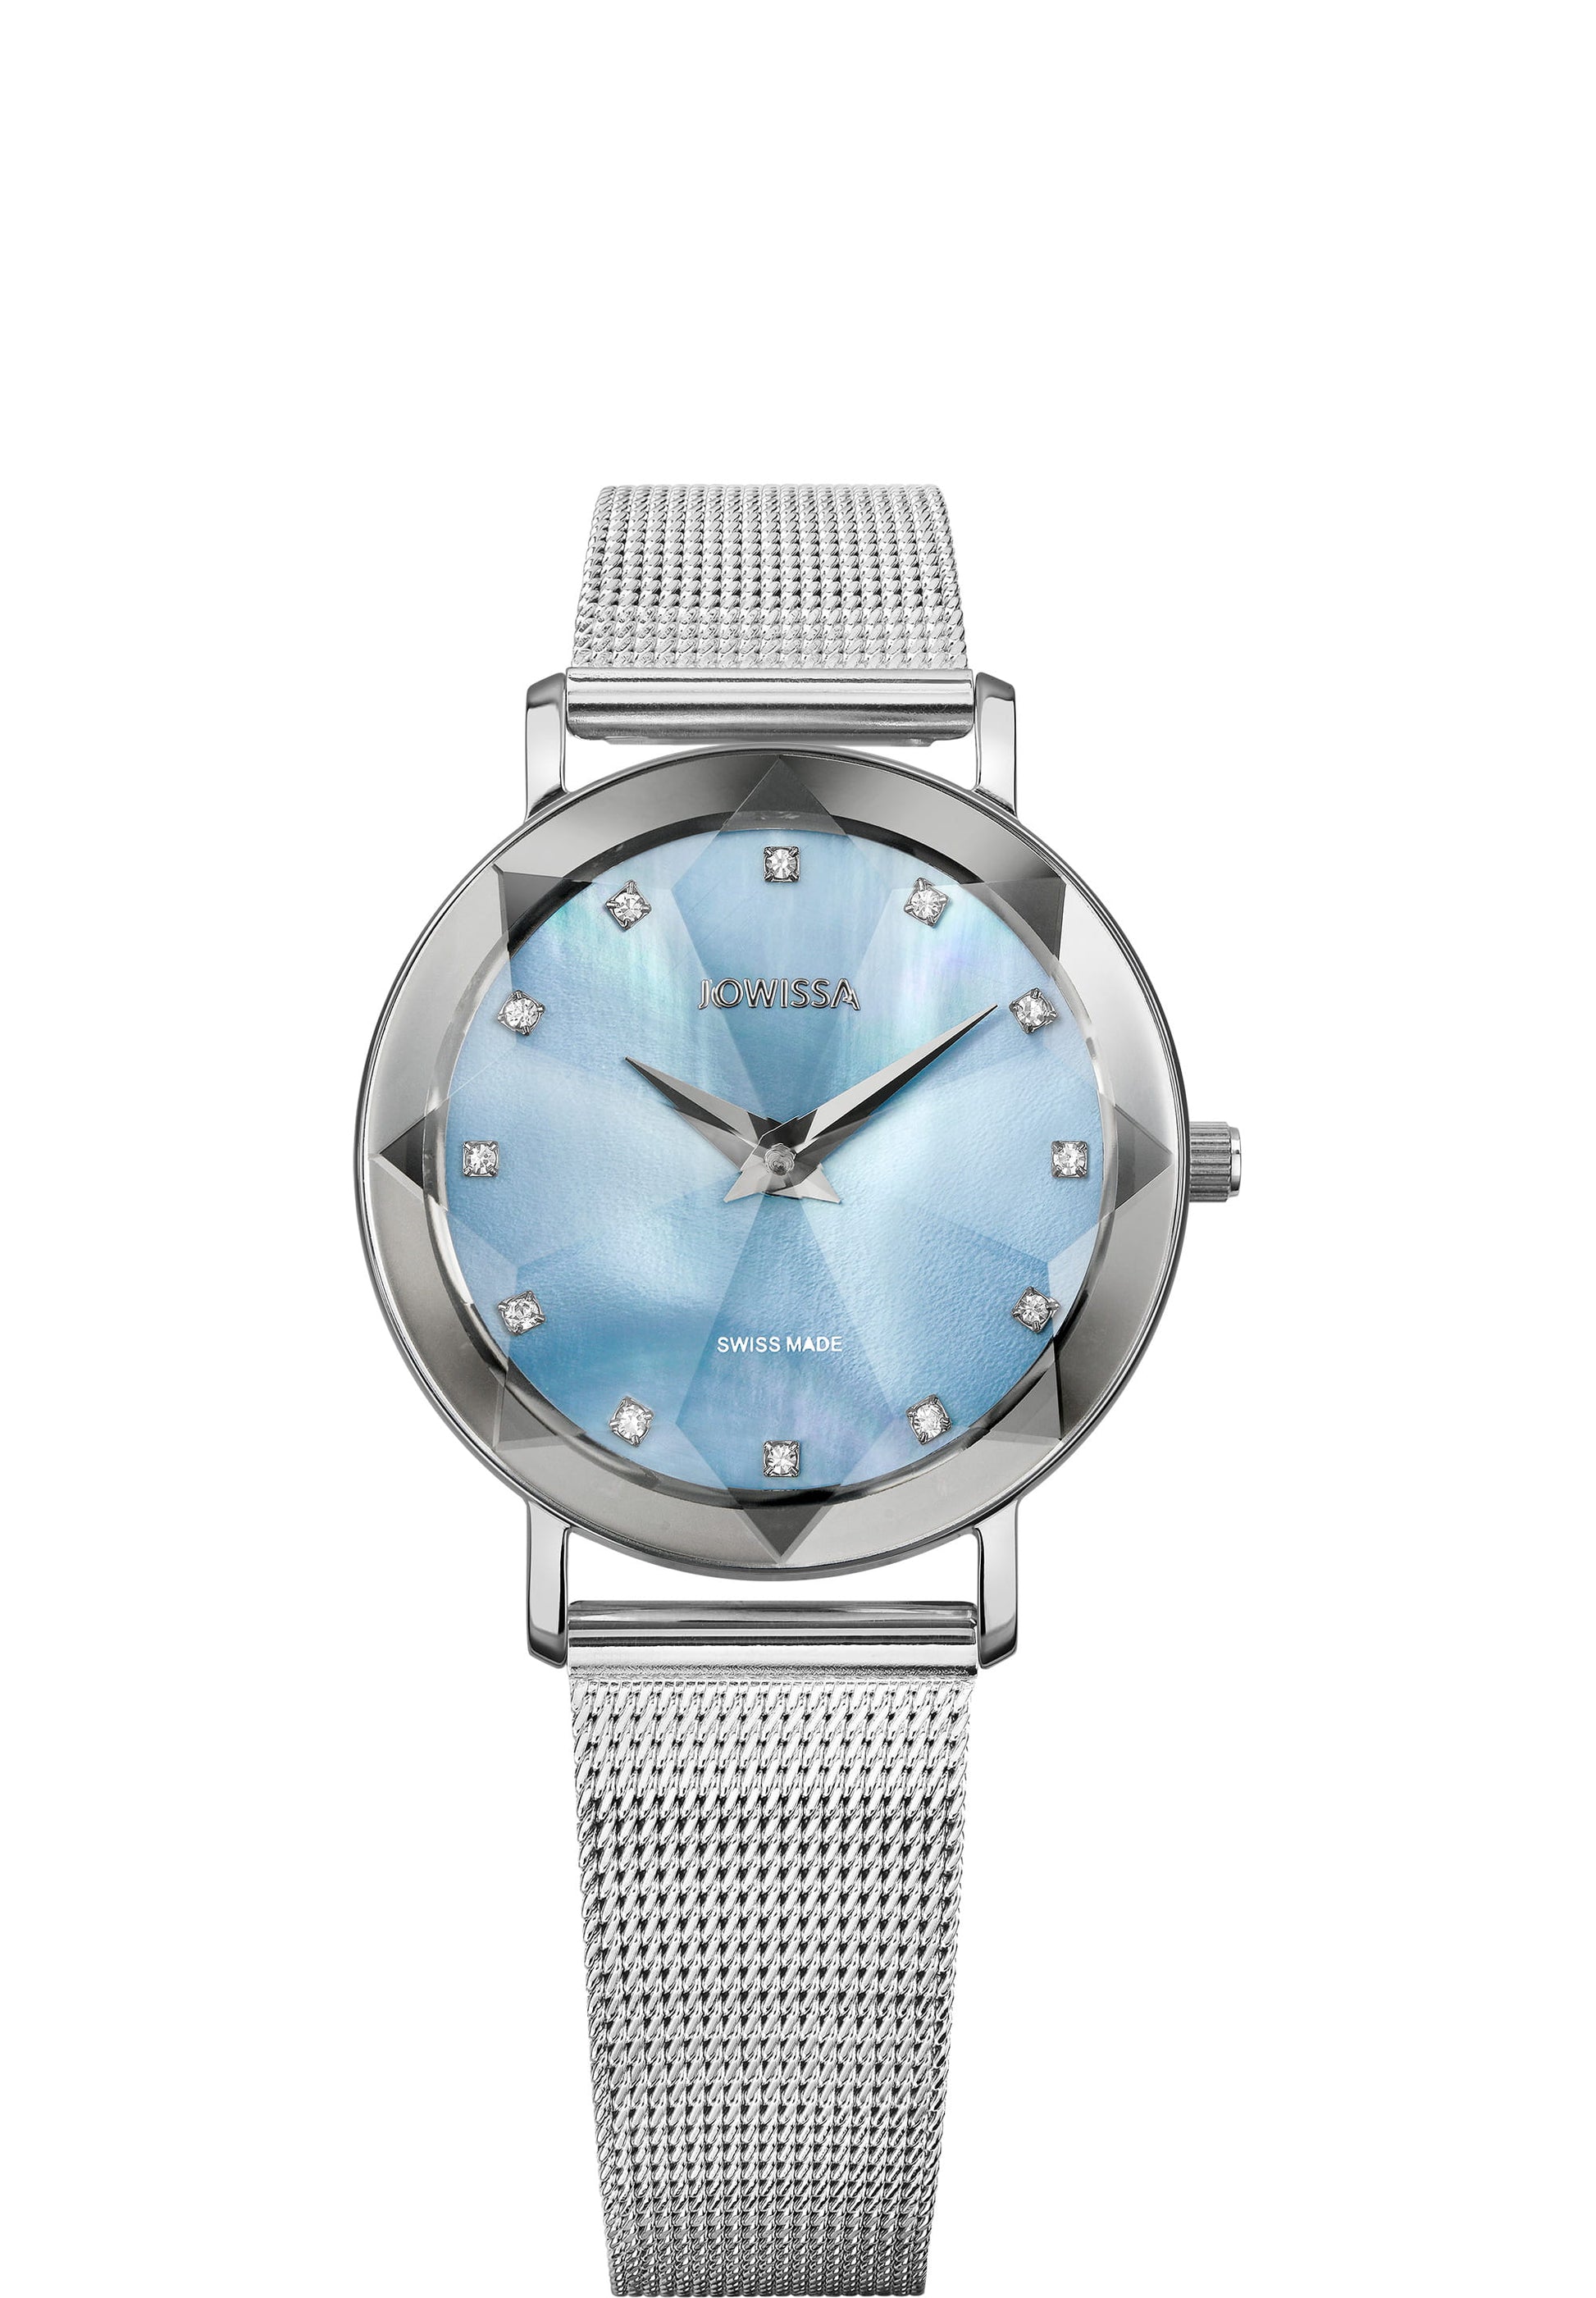 Facet Swiss Ladies Watch J5.238.M, Jowissa, Watches, facet-swiss-ladies-watch-j5-238-m-1417393173, 2023, blue, category-reference-2995, EN Quartz, Facet, female, Flag--Swiss Made, label--NEW, Mesh, Mother of Pearl, NOT-InStock-Hamburg, order--154, related--J5.238.L, related--J5.668.L, related--J5.668.M, related--JS.0055, related--JS.0069.L, related--JS.0069.S, silver, size--30mm, Stainless Steel, Steel, Steel / Light Blue Mother-of-pearl, Stones, Swiss Ladies Watch, synced, Time Scale, with cut, Wrist Watch